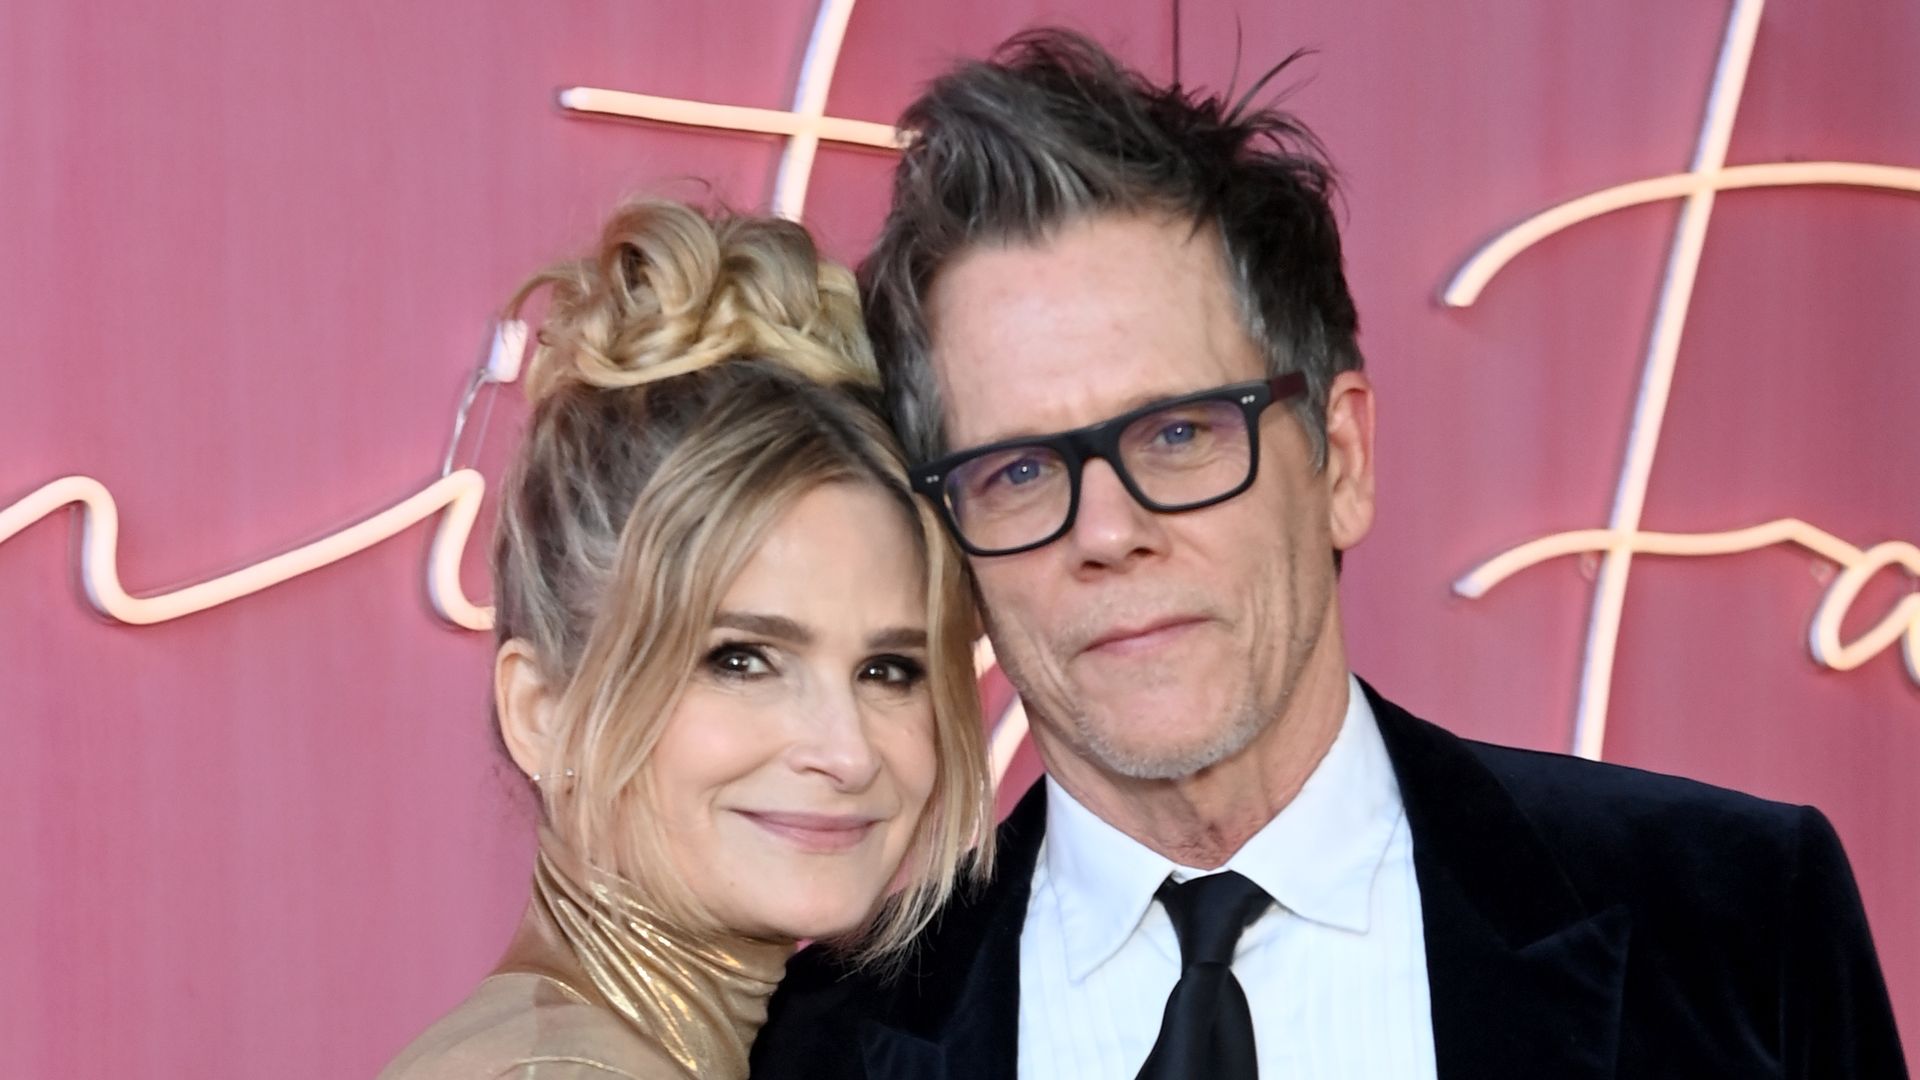 Kyra Sedgwick and Kevin Bacon attend the 2022 Vanity Fair Oscar Party hosted by Radhika Jones at Wallis Annenberg Center for the Performing Arts on March 27, 2022 in Beverly Hills, California